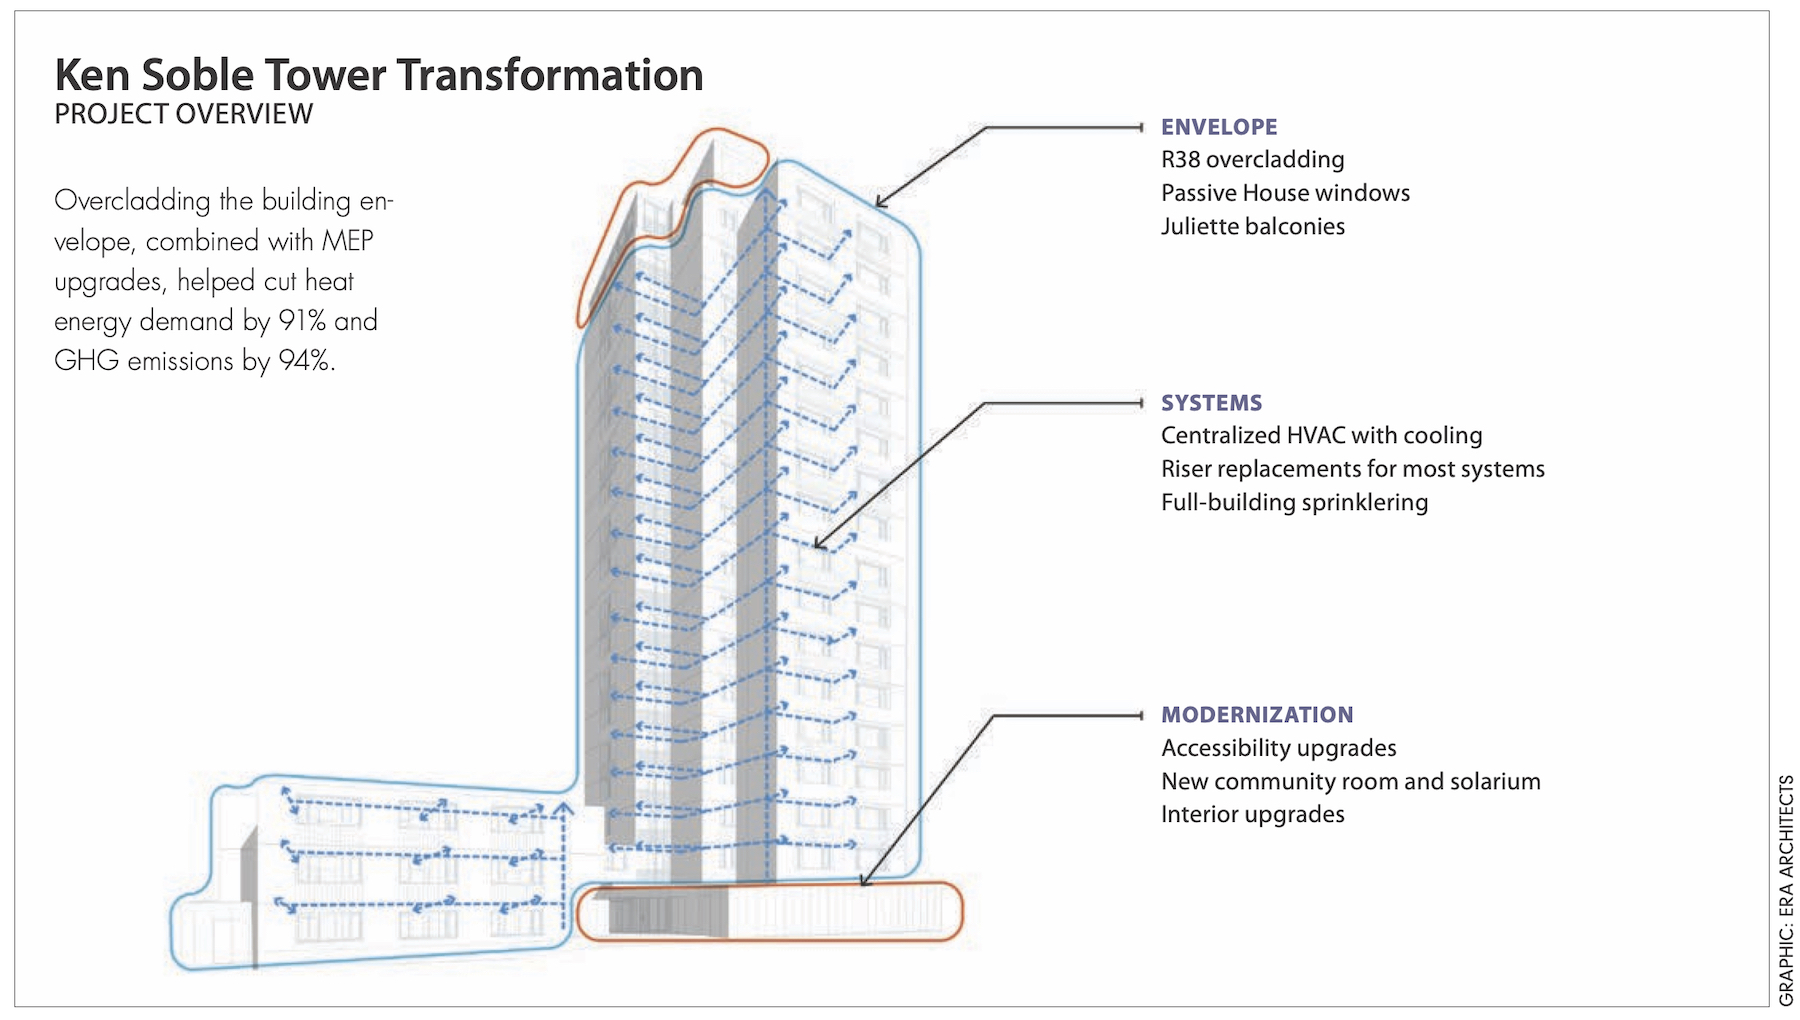 Ken Soble Tower becomes world’s largest residential Passive House retrofit 1.jpg